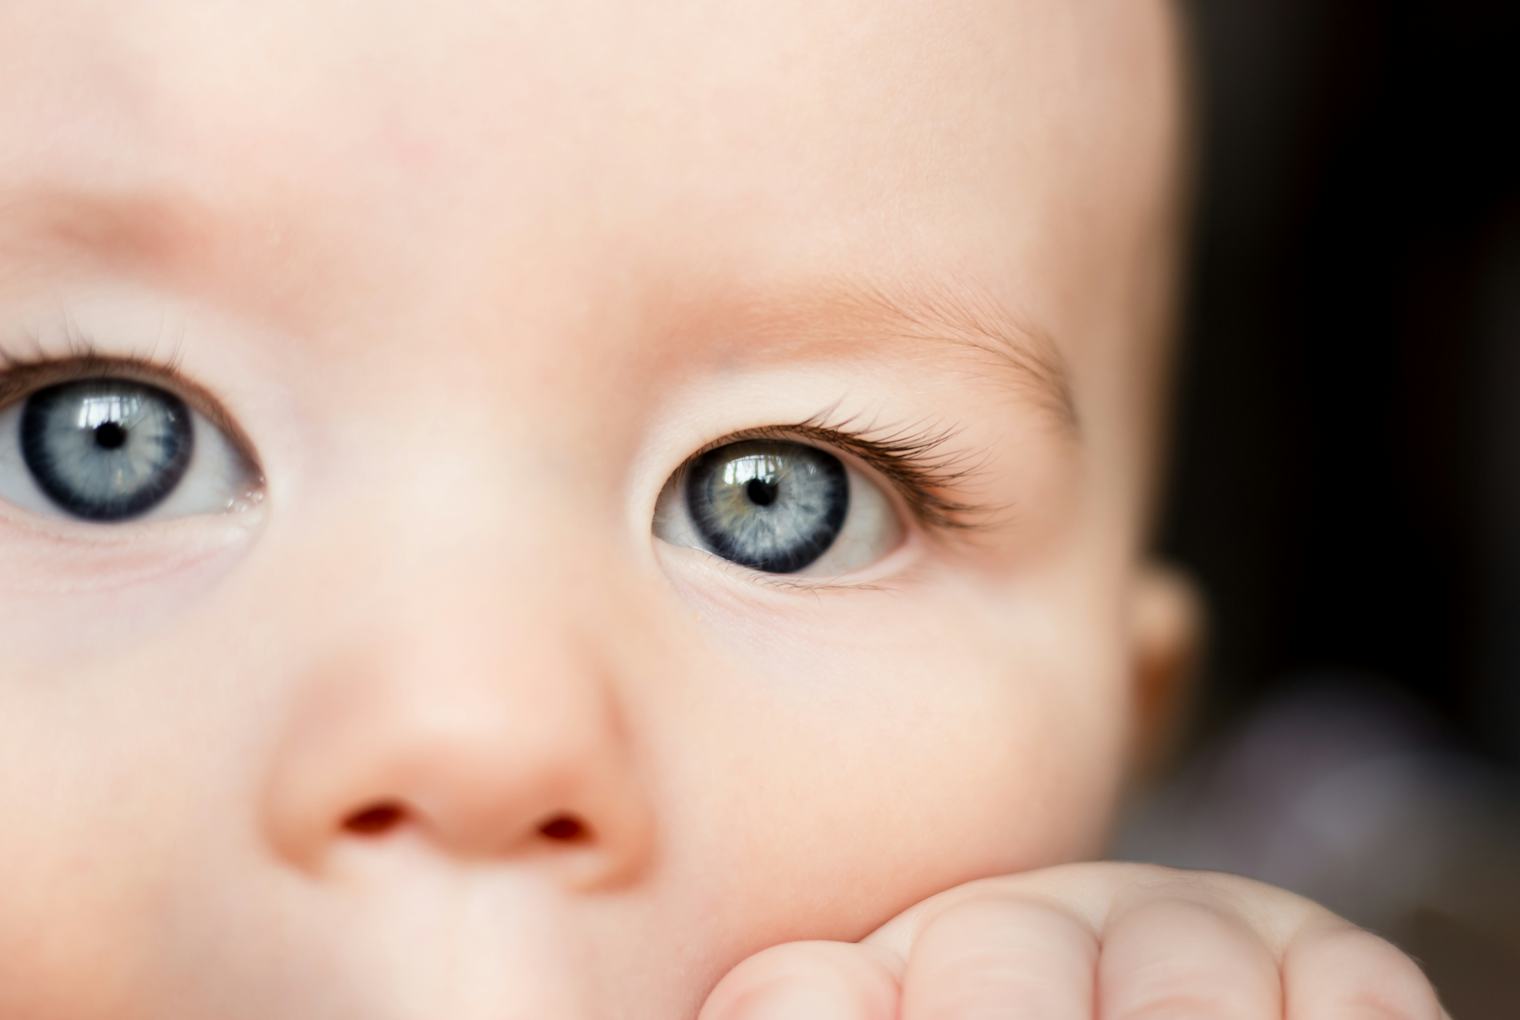 When Is A Baby’s Eye Color Fully Developed?